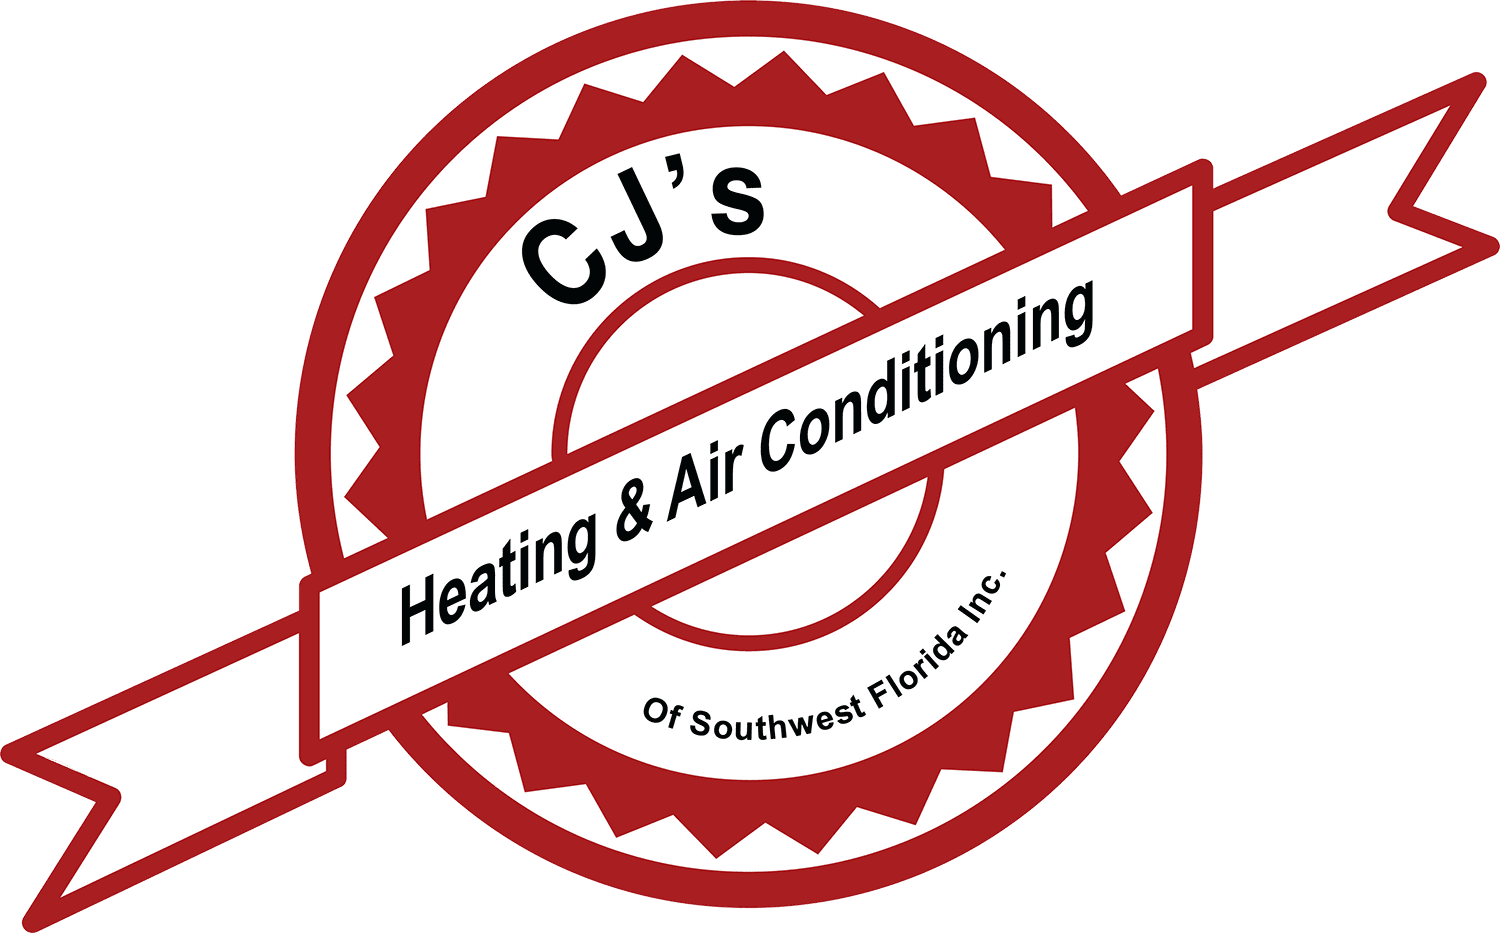 home-cj-s-heating-and-air-conditioning-inc